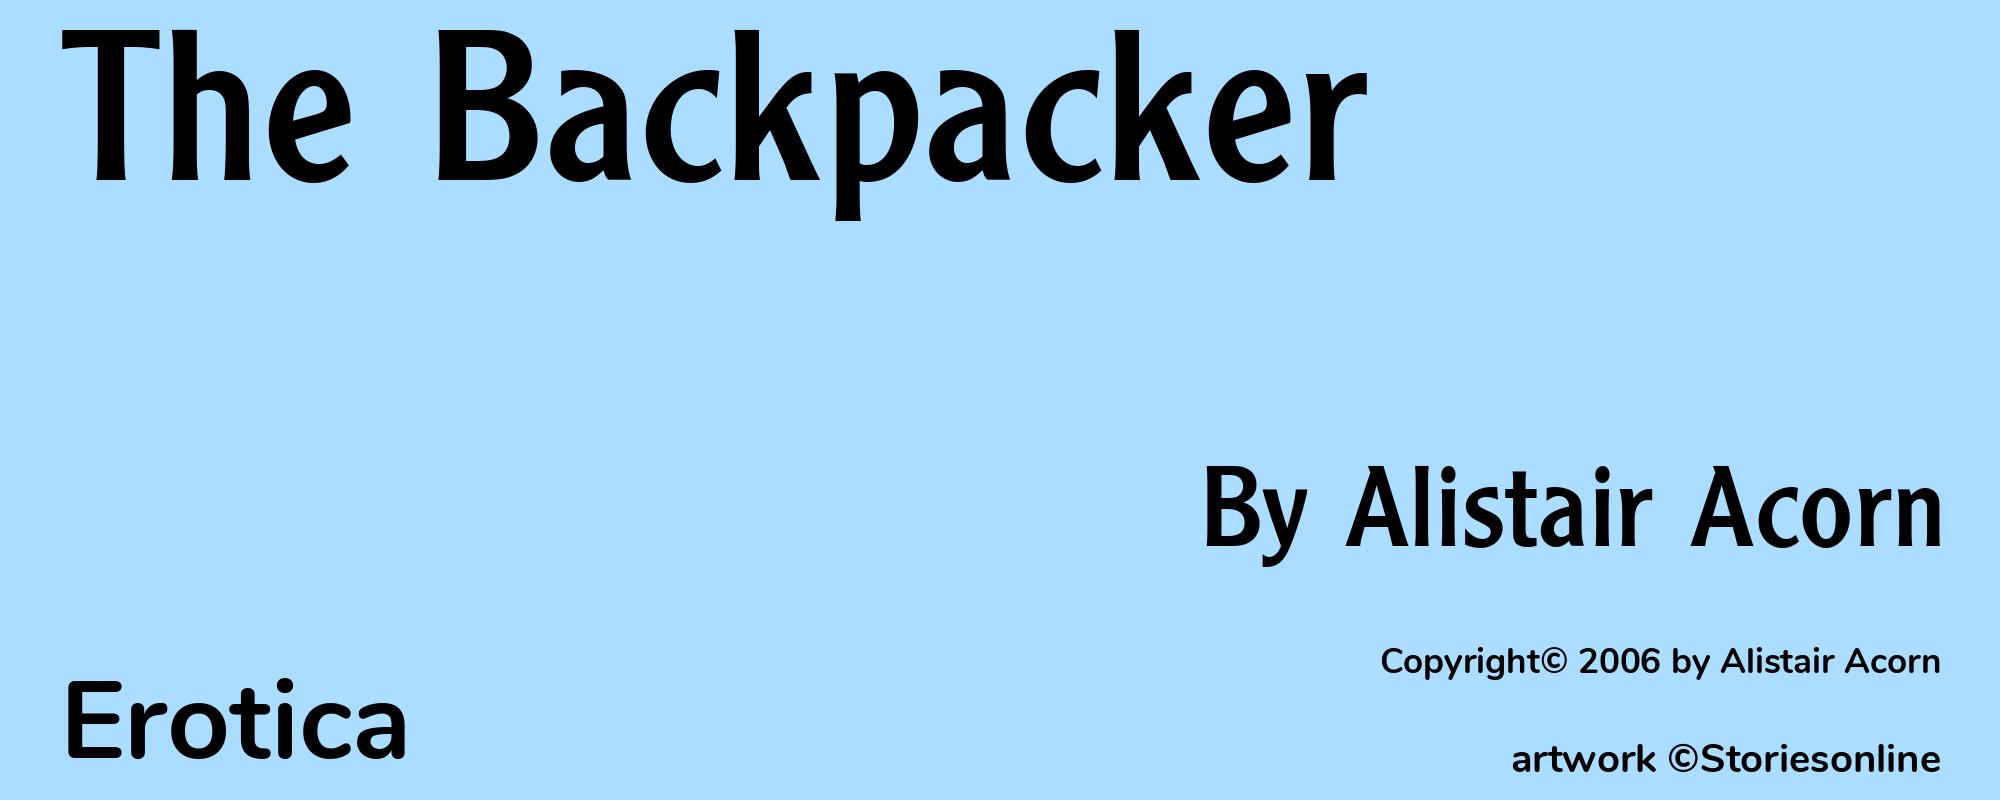 The Backpacker - Cover